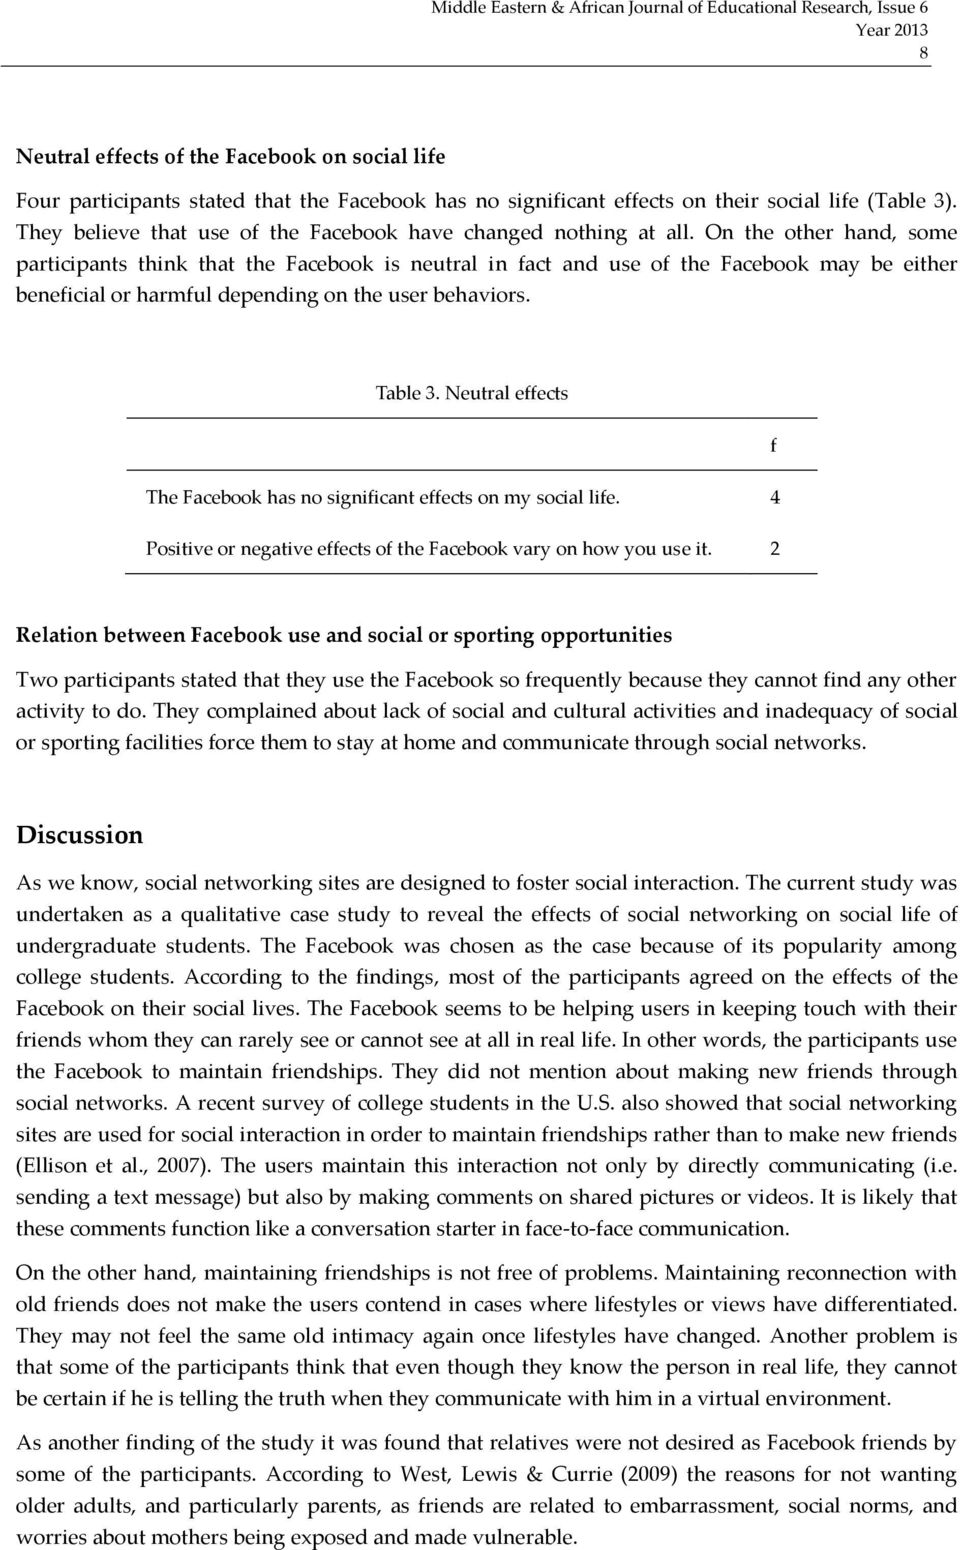 On the other hand, some participants think that the Facebook is neutral in fact and use of the Facebook may be either beneficial or harmful depending on the user behaviors. Table 3.